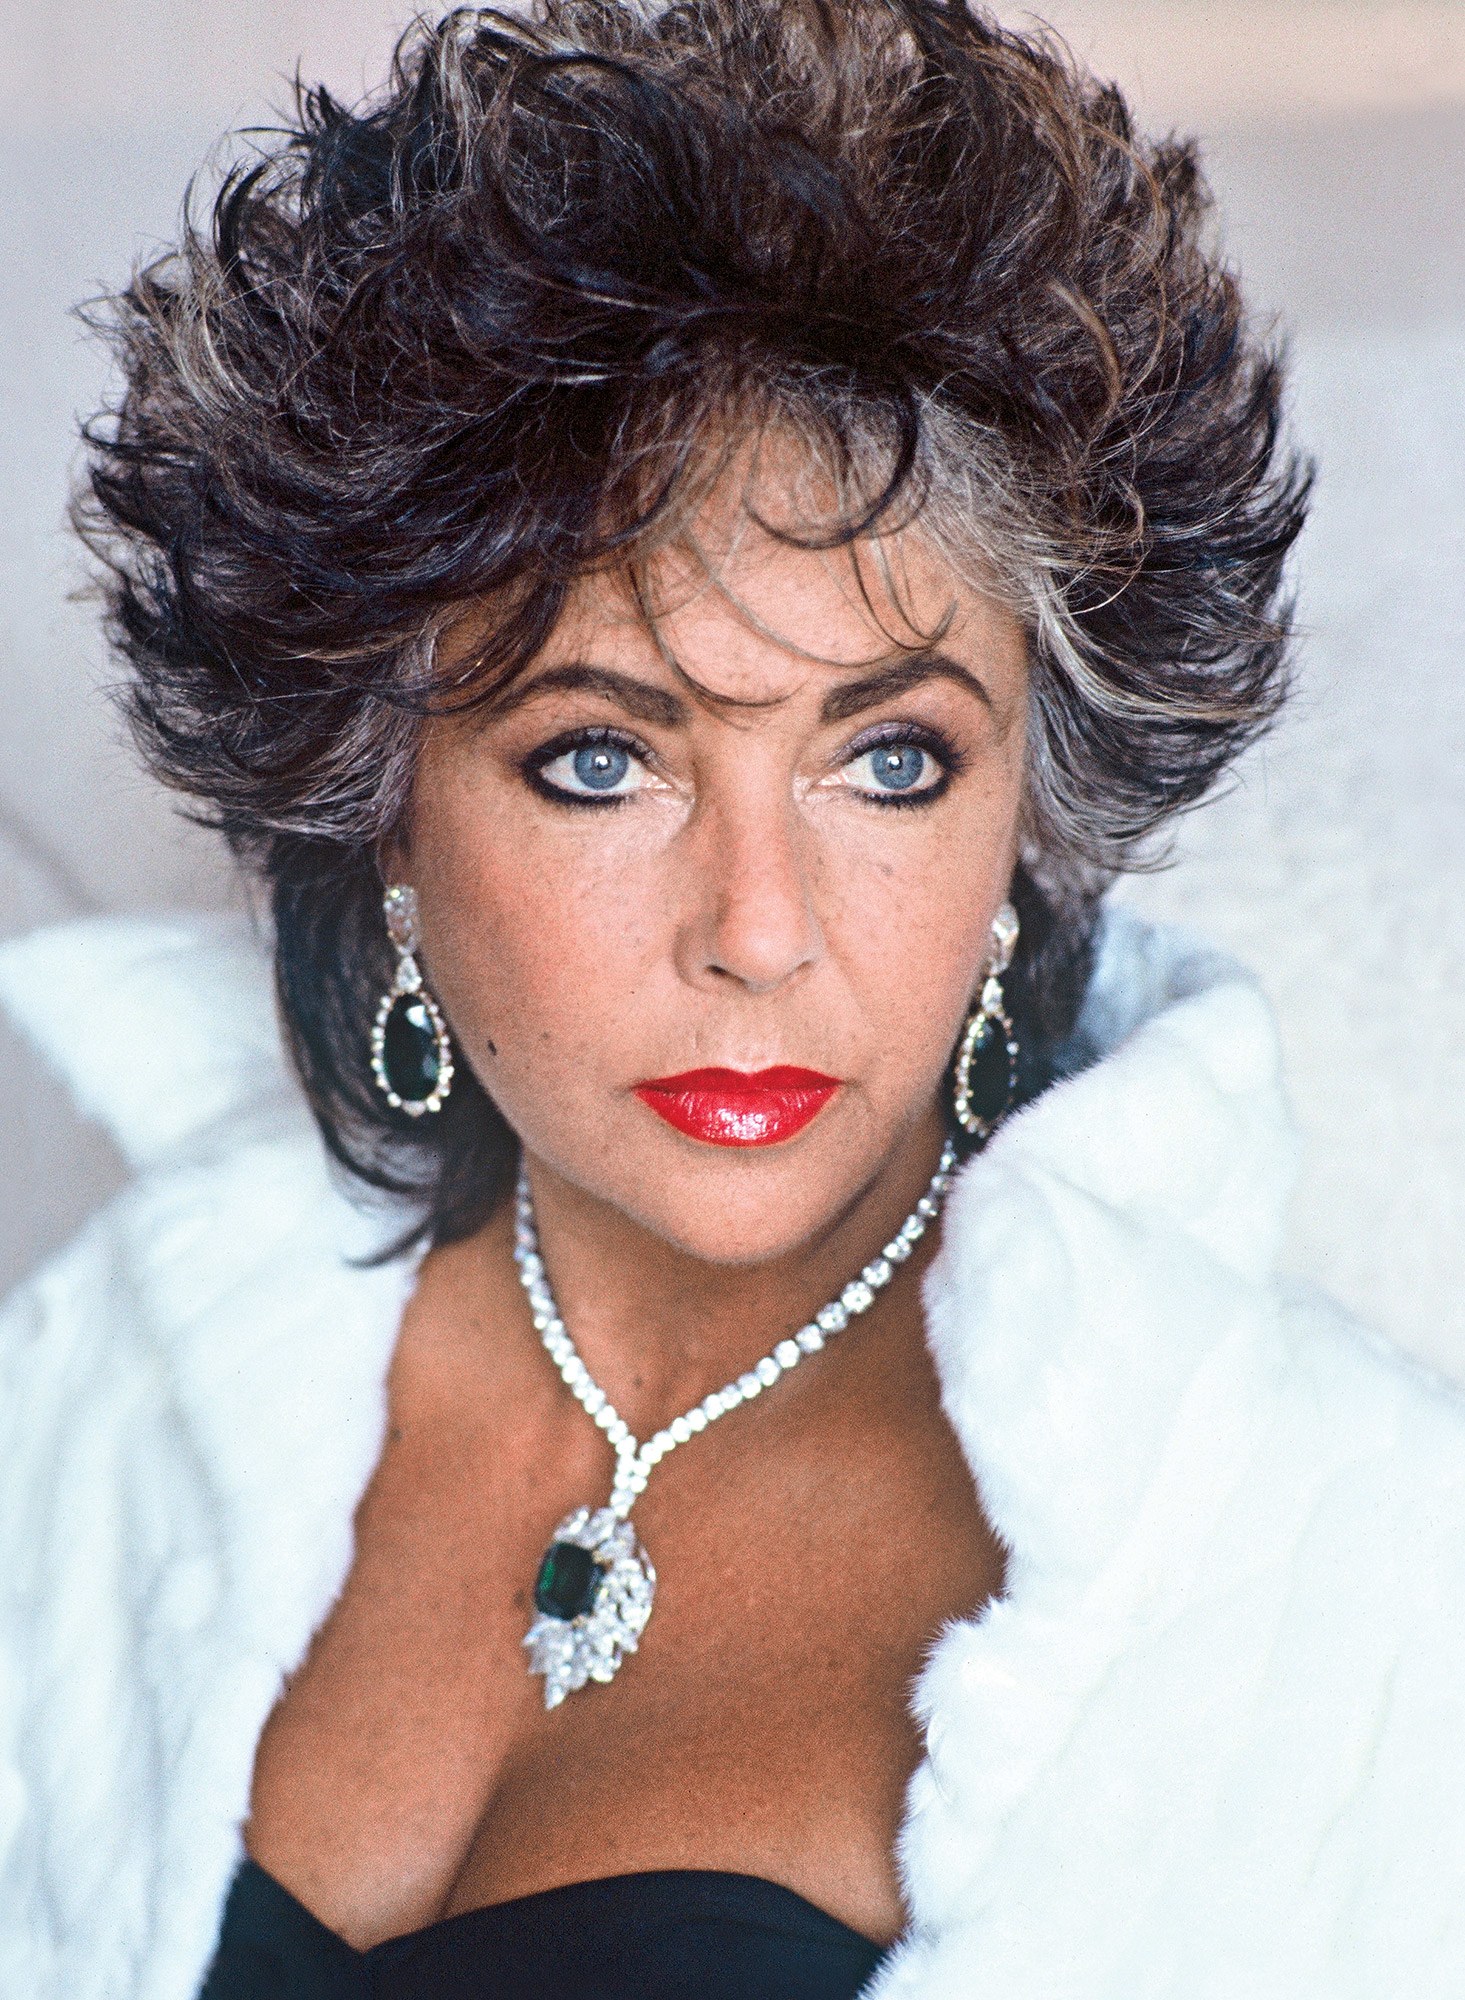 Happy Birthday to the late Elizabeth Taylor who would\ve turned 90 today. 